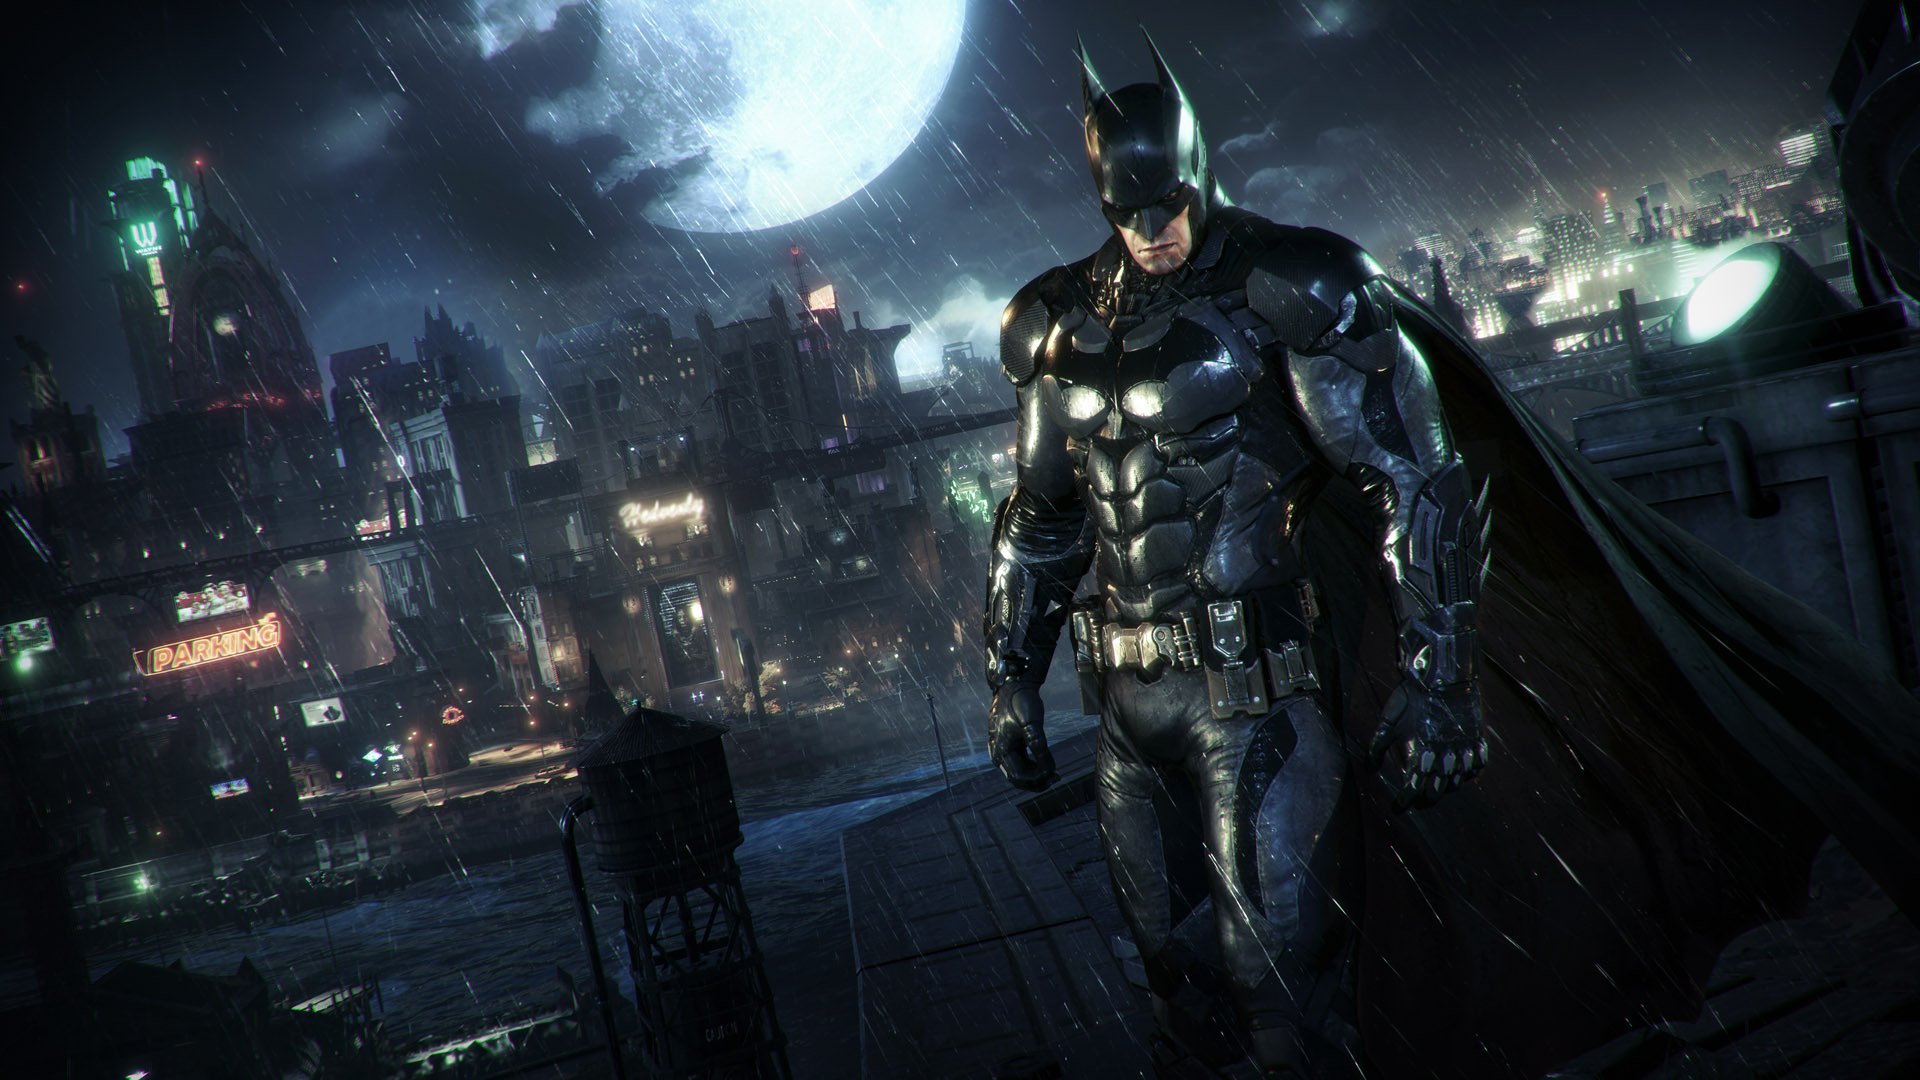 Best open world games: Batman in Batman: Arkham Knight is standing on a rooftop in the rain, looking very serious.